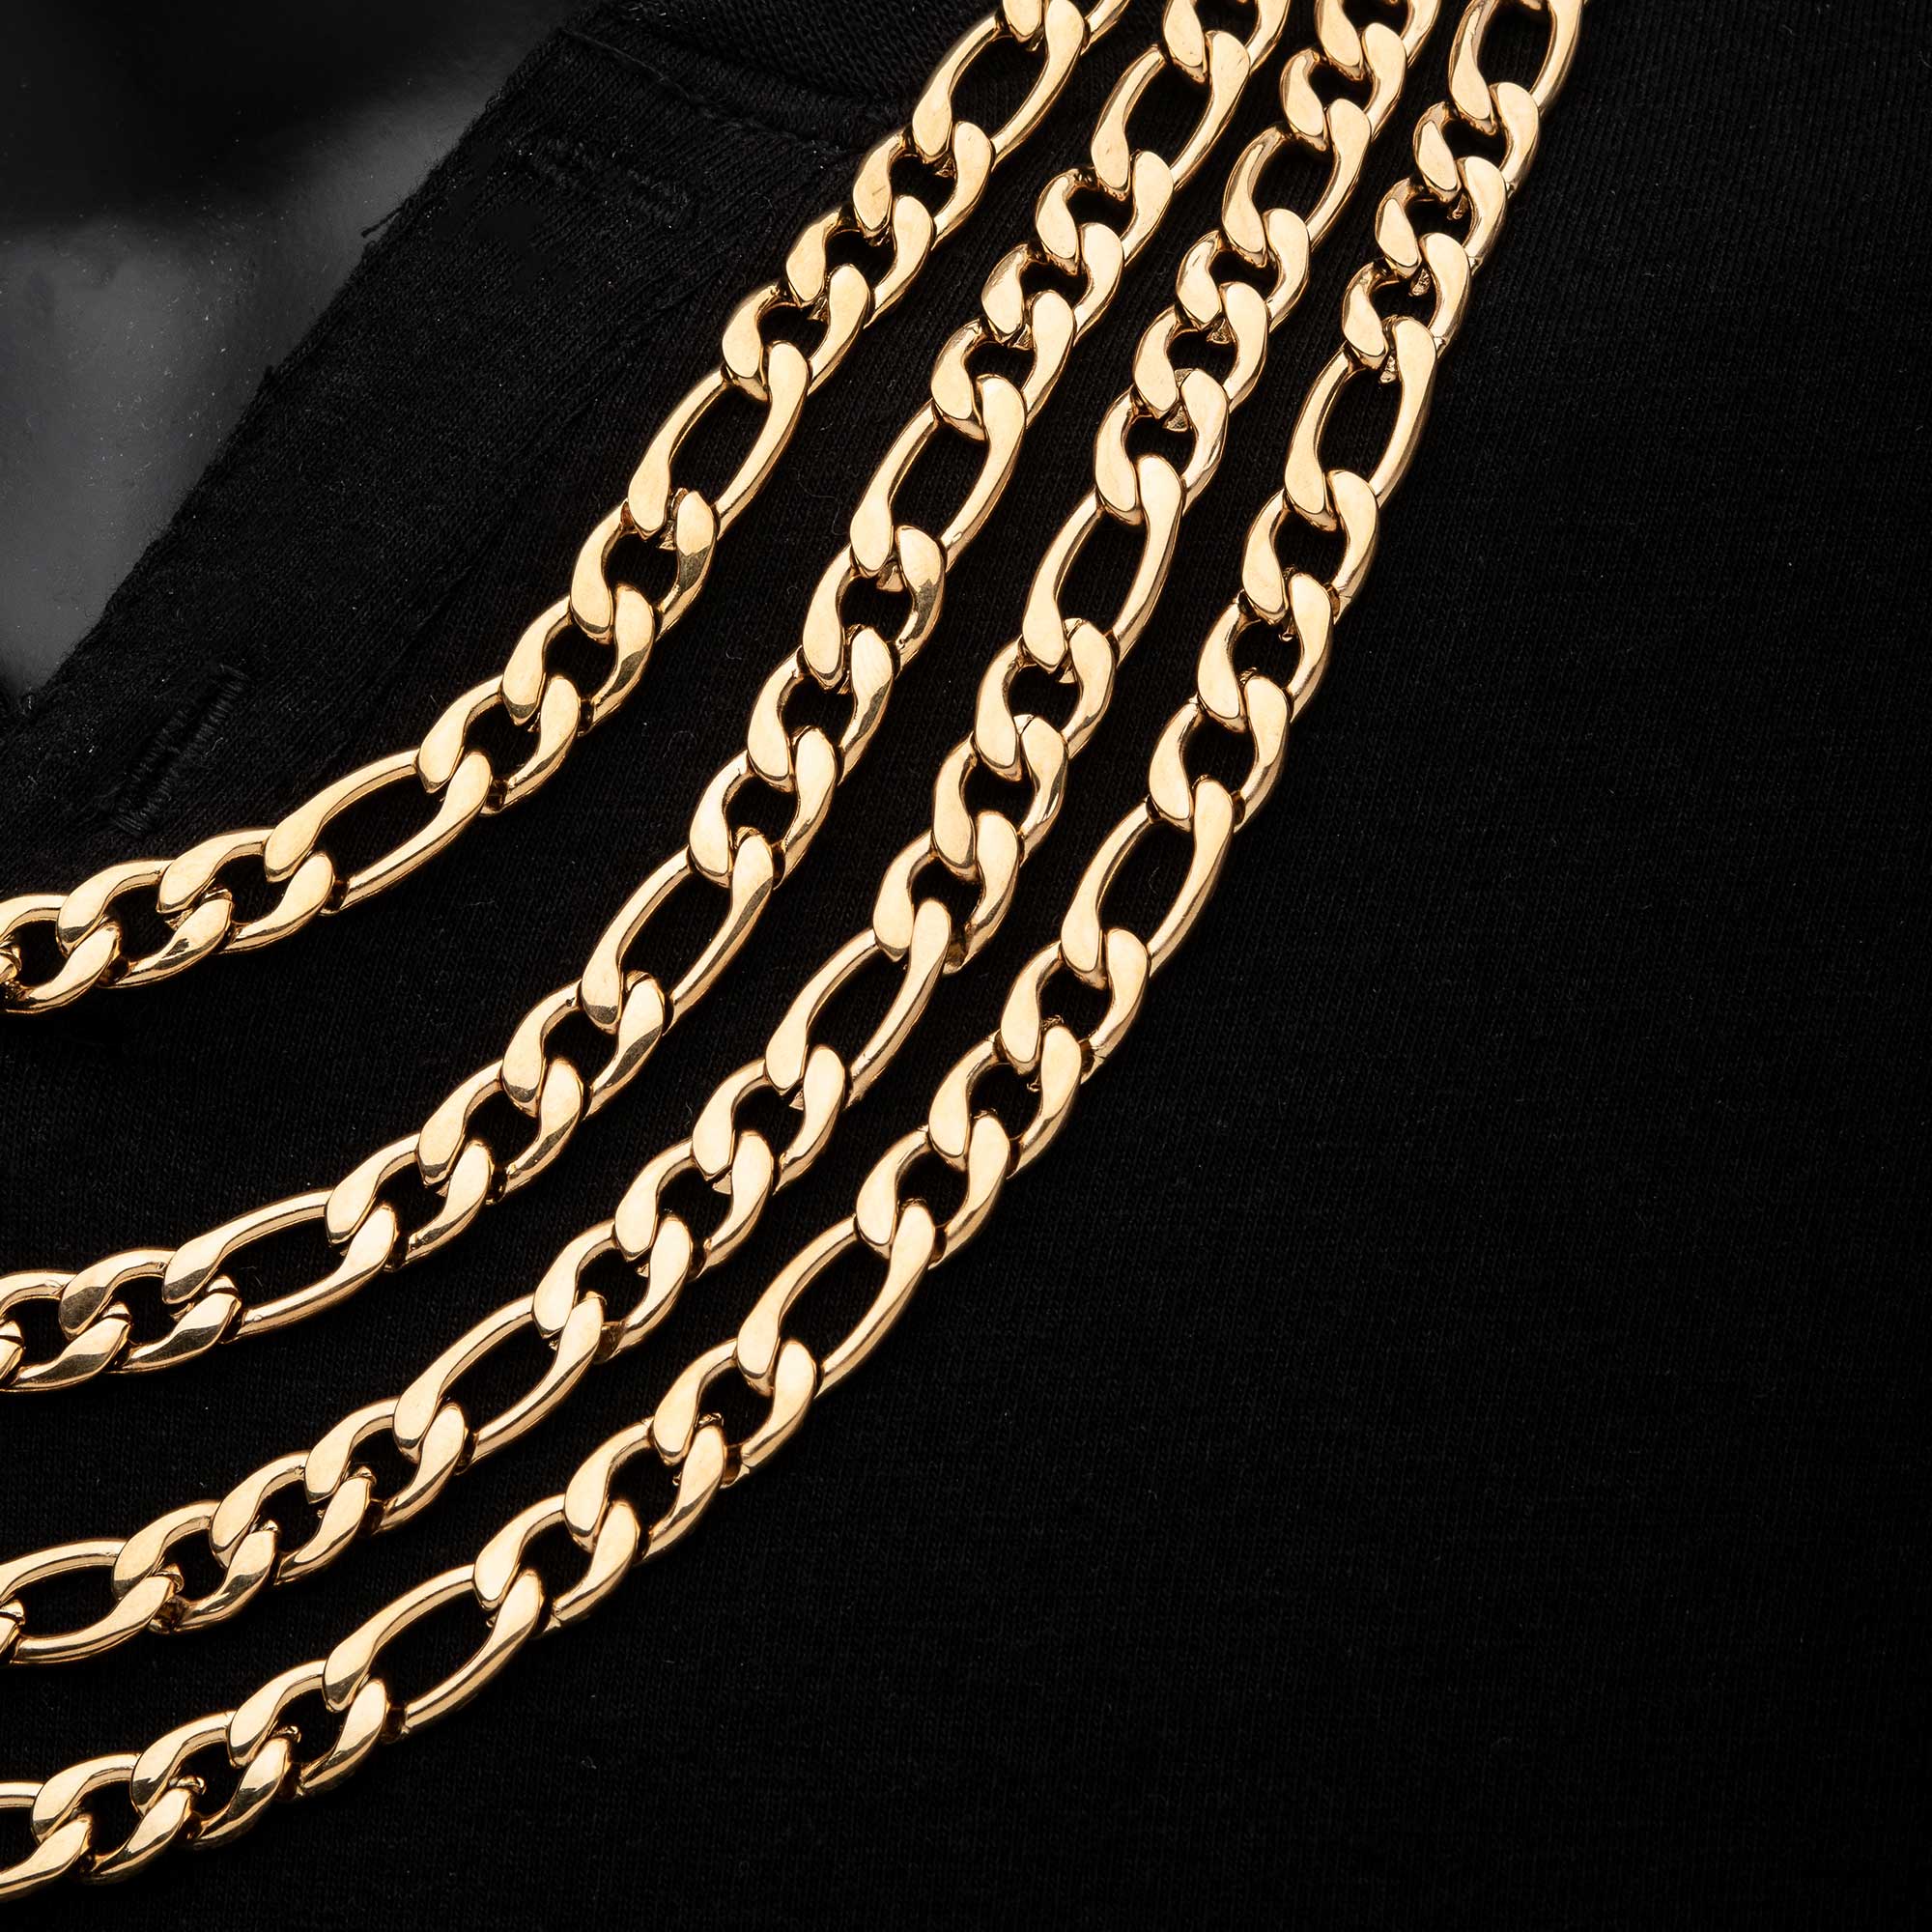 8mm 18K Gold Plated Figaro Chain Image 4 Jayson Jewelers Cape Girardeau, MO